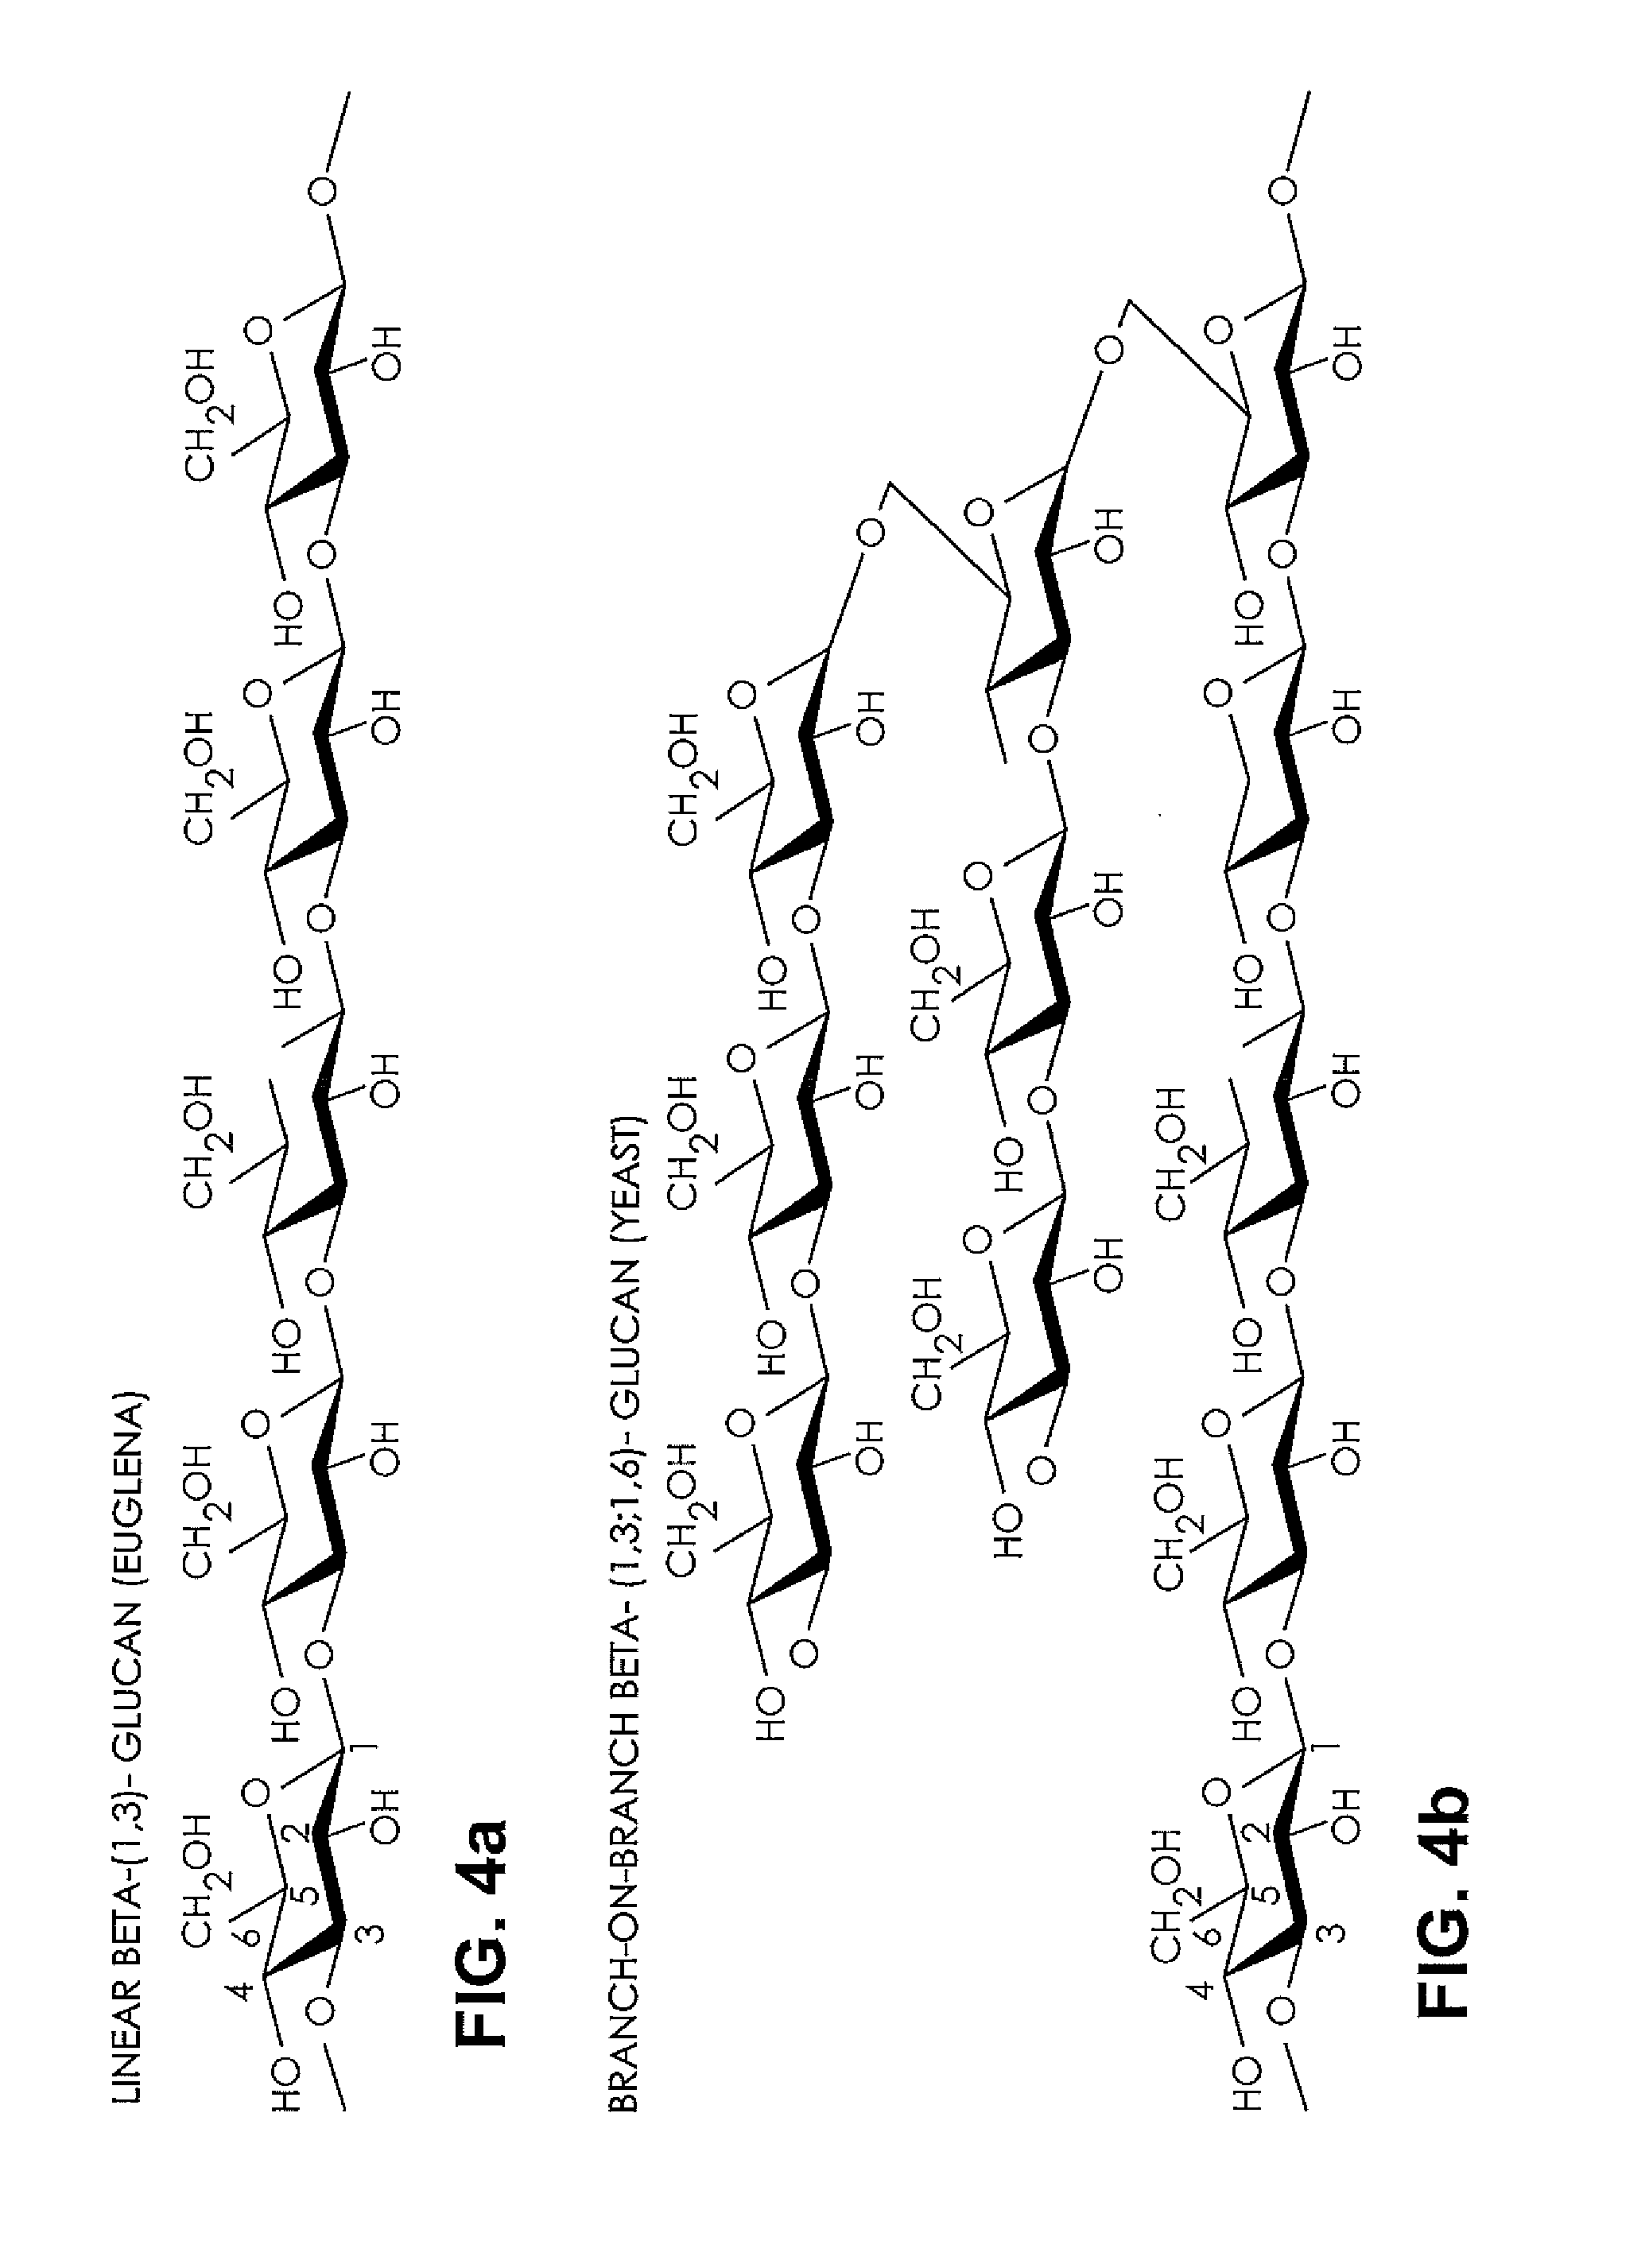 Animal feed compositions and methods of using the same